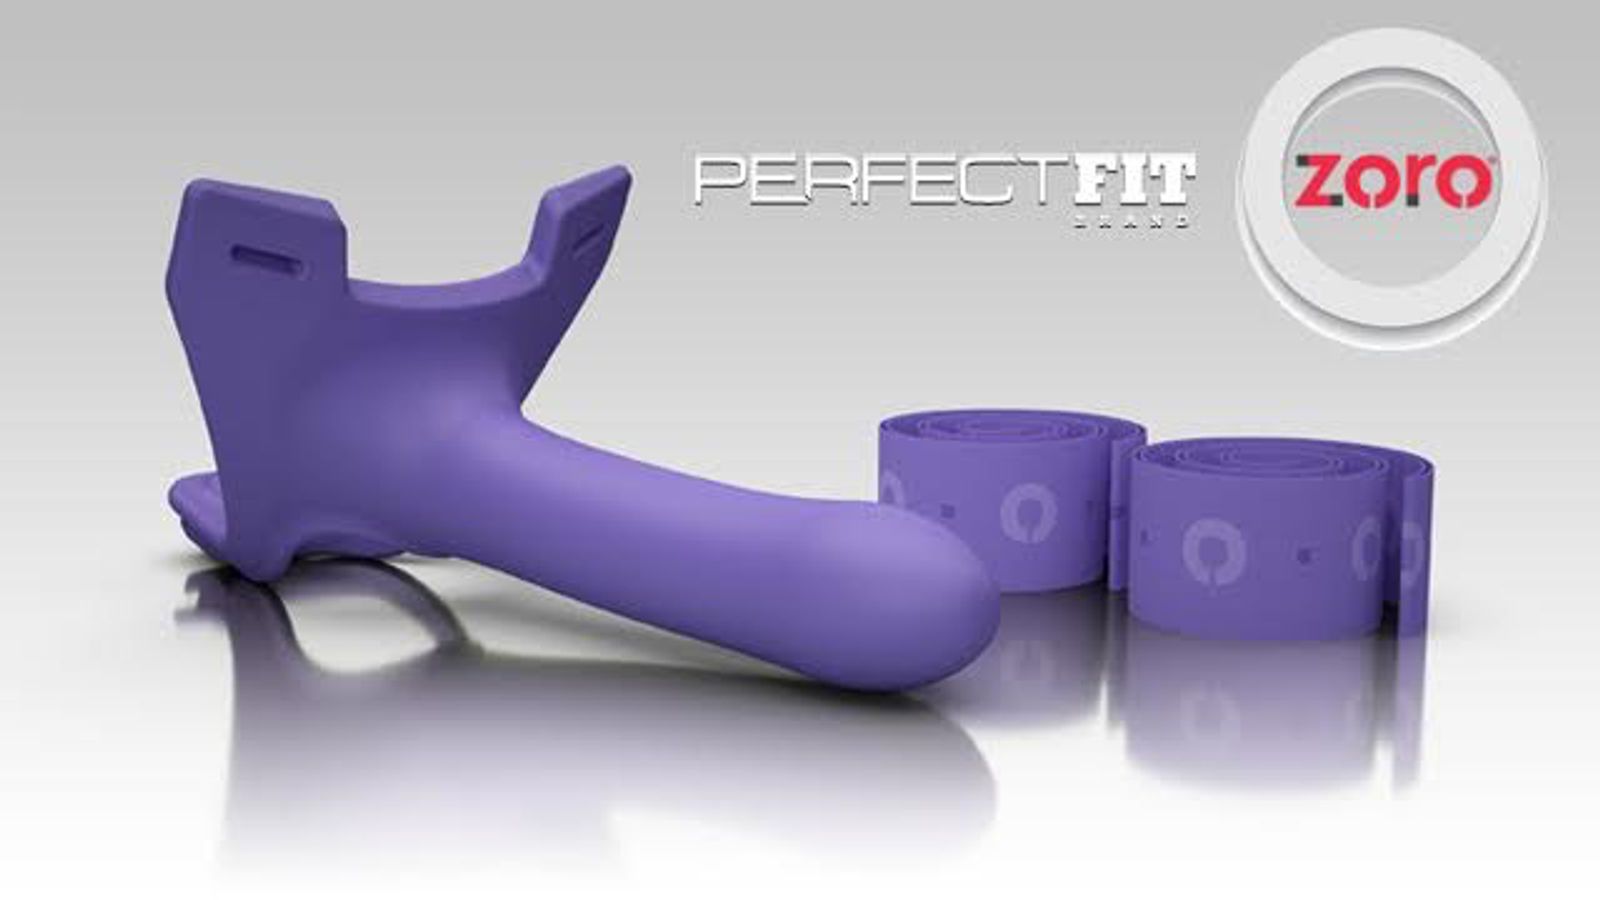 Perfect Fit Debuts Zoro Strap-On For Pegging